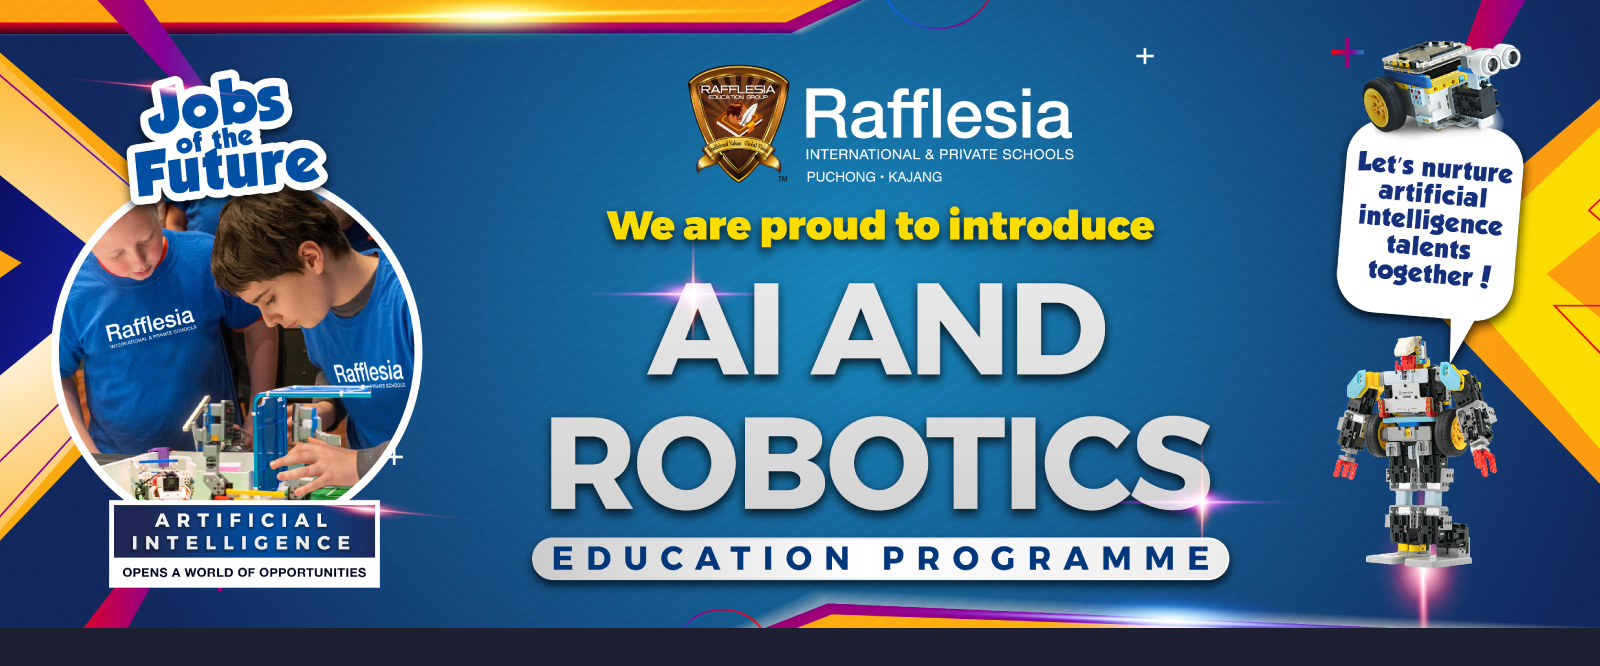 AI AND ROBOTIC EDUCATION PROGRAMME